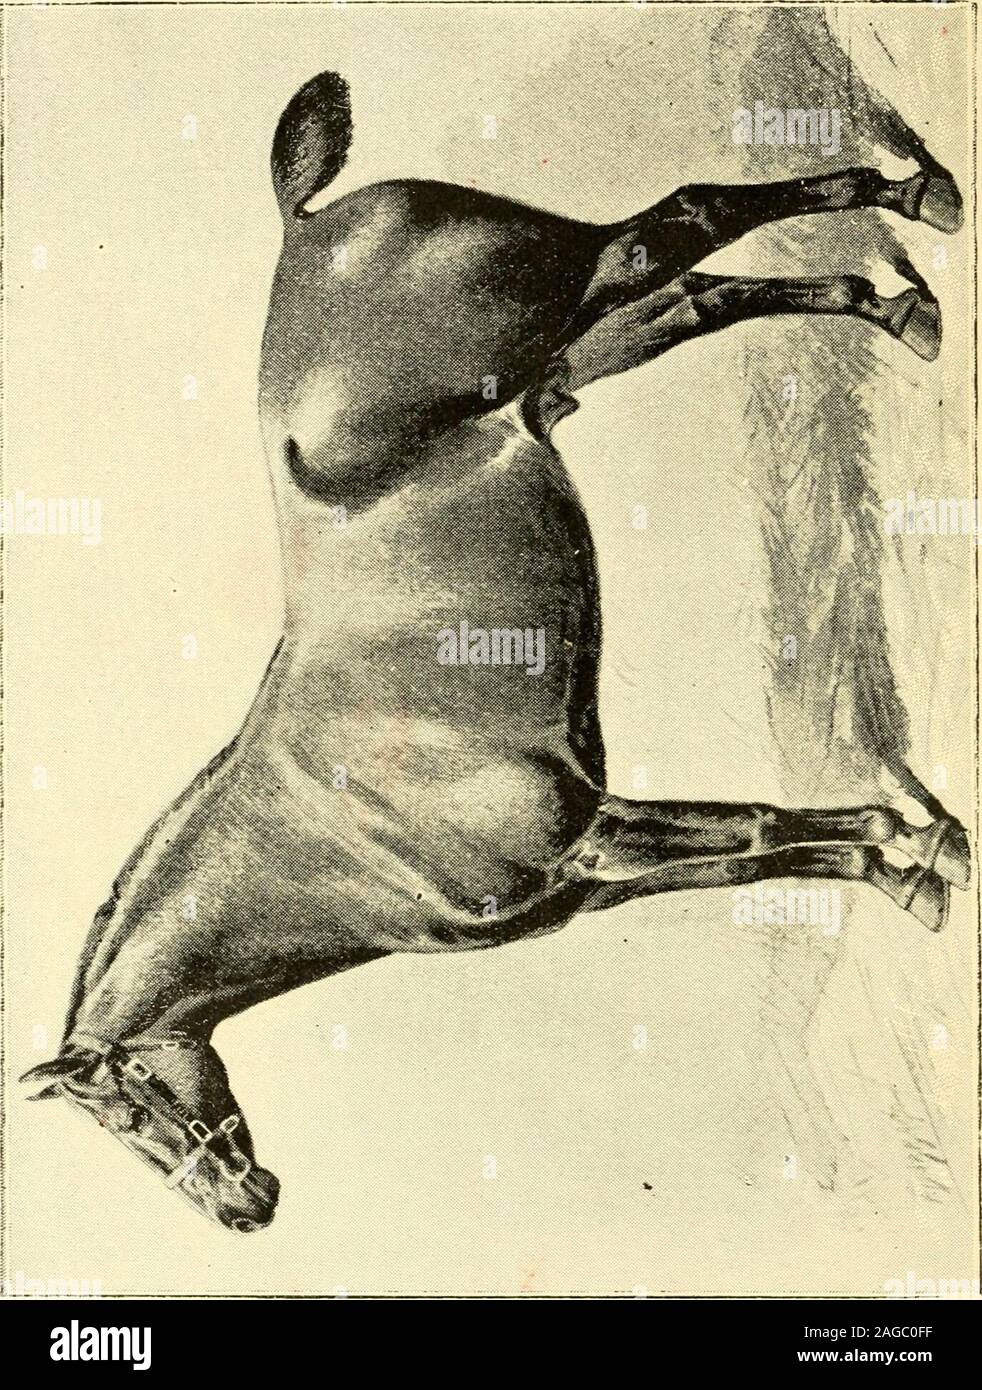 . The horse : its varieties and management in health and disease. book is thoroughly trustworthy, and can be recommended to anyfarmer with perfect confidence.—The Times. Price Is. each.THE HORSEOWNER AND STABLEMANS COMPANION ; or, Hints on the Selection, Purchase, and Management of theHorse. By George Armatage, M.R.C.V.S. {Fourth Edition.) To the proprietors of large stables, and to those who are in the practical manage-ment of them, Mr. Armatages advice will be valuable indeed, and will doubtlessresult in improvement and economy.—County Gentleman. HOW TO FEED THE HORSE, AVOID DISEASE, ANDSAVE Stock Photo